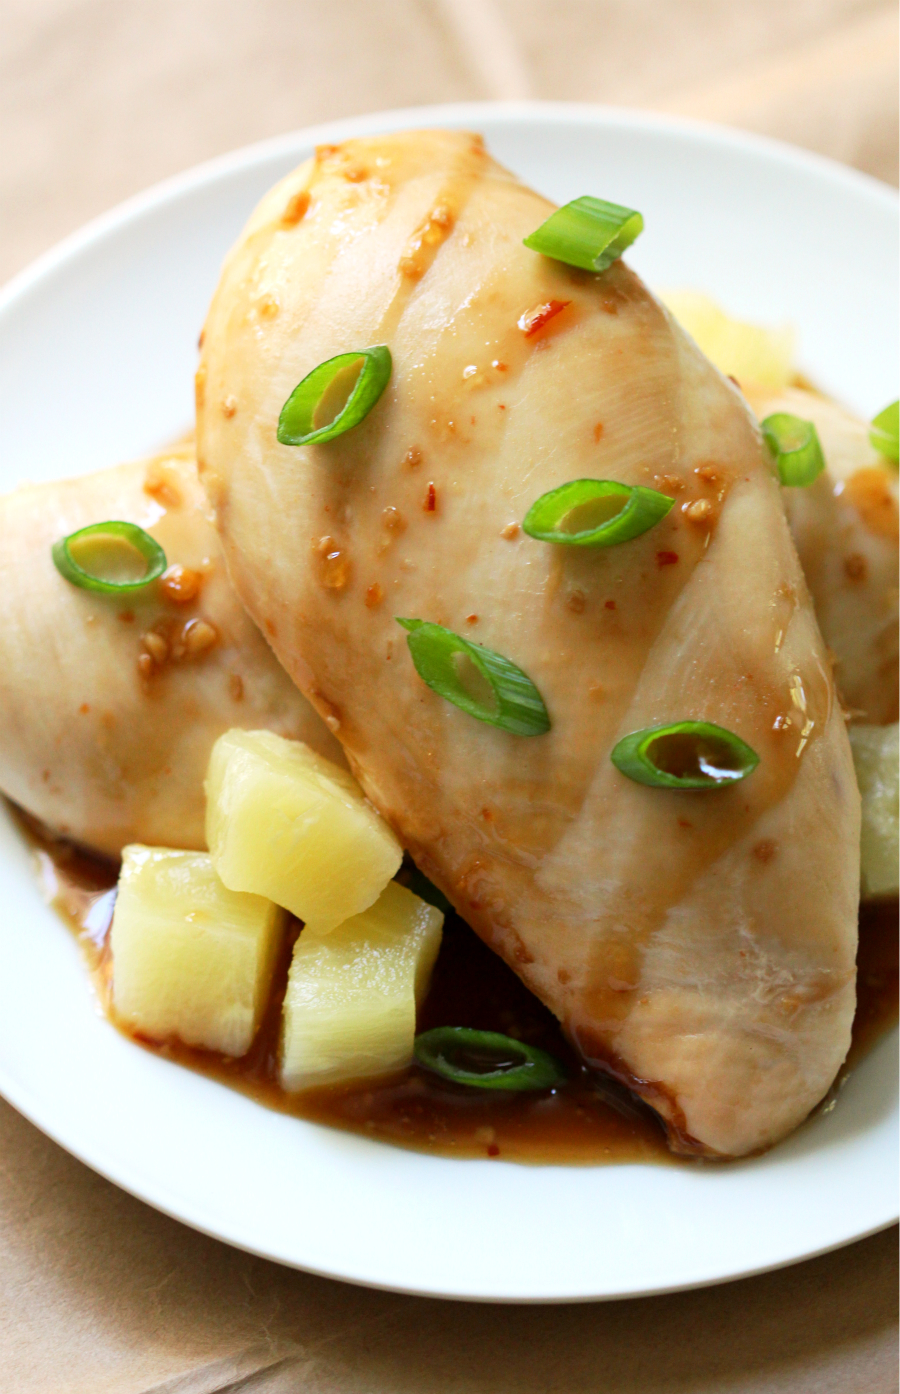 Pineapple Teriyaki Chicken | Strength and Sunshine @RebeccaGF666 Everyone loves some teriyaki! This Pineapple Teriyaki Chicken is gluten-free, paleo, and allergy-free! With a sweet homemade sauce recipe to accompany this new family favorite dinner, weeknights just got a lot more healthy and delicious!